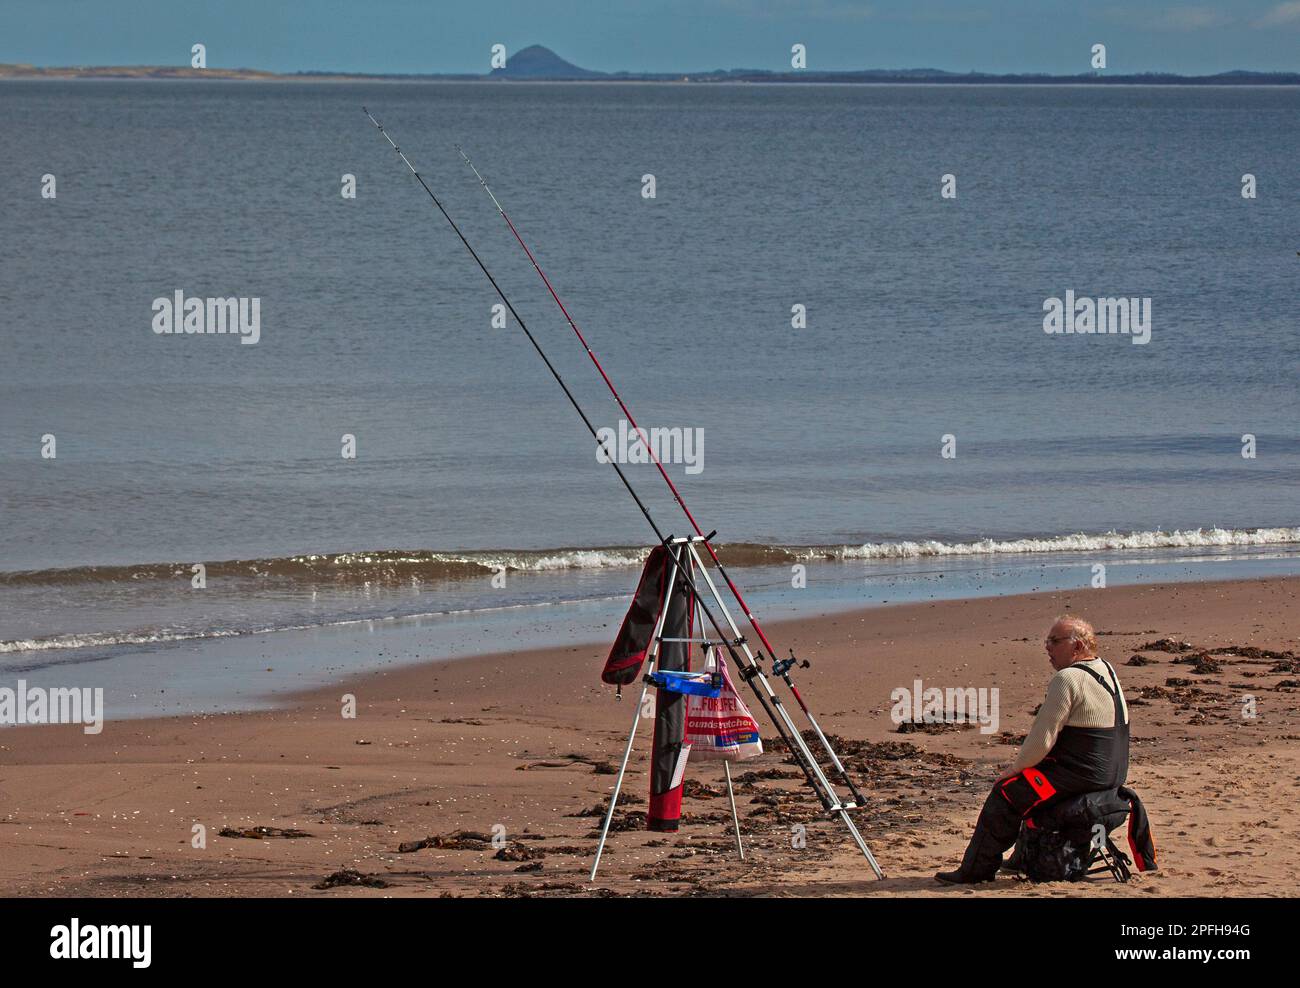 Portobello beach, Edinburgh, Scotland, UK. 17 March 2023. Sunny and 13 degrees centigrade for this lone sea fisherman with his lines out in the Firth of Forth. Credit: Archwhite/alamy live news. Stock Photo